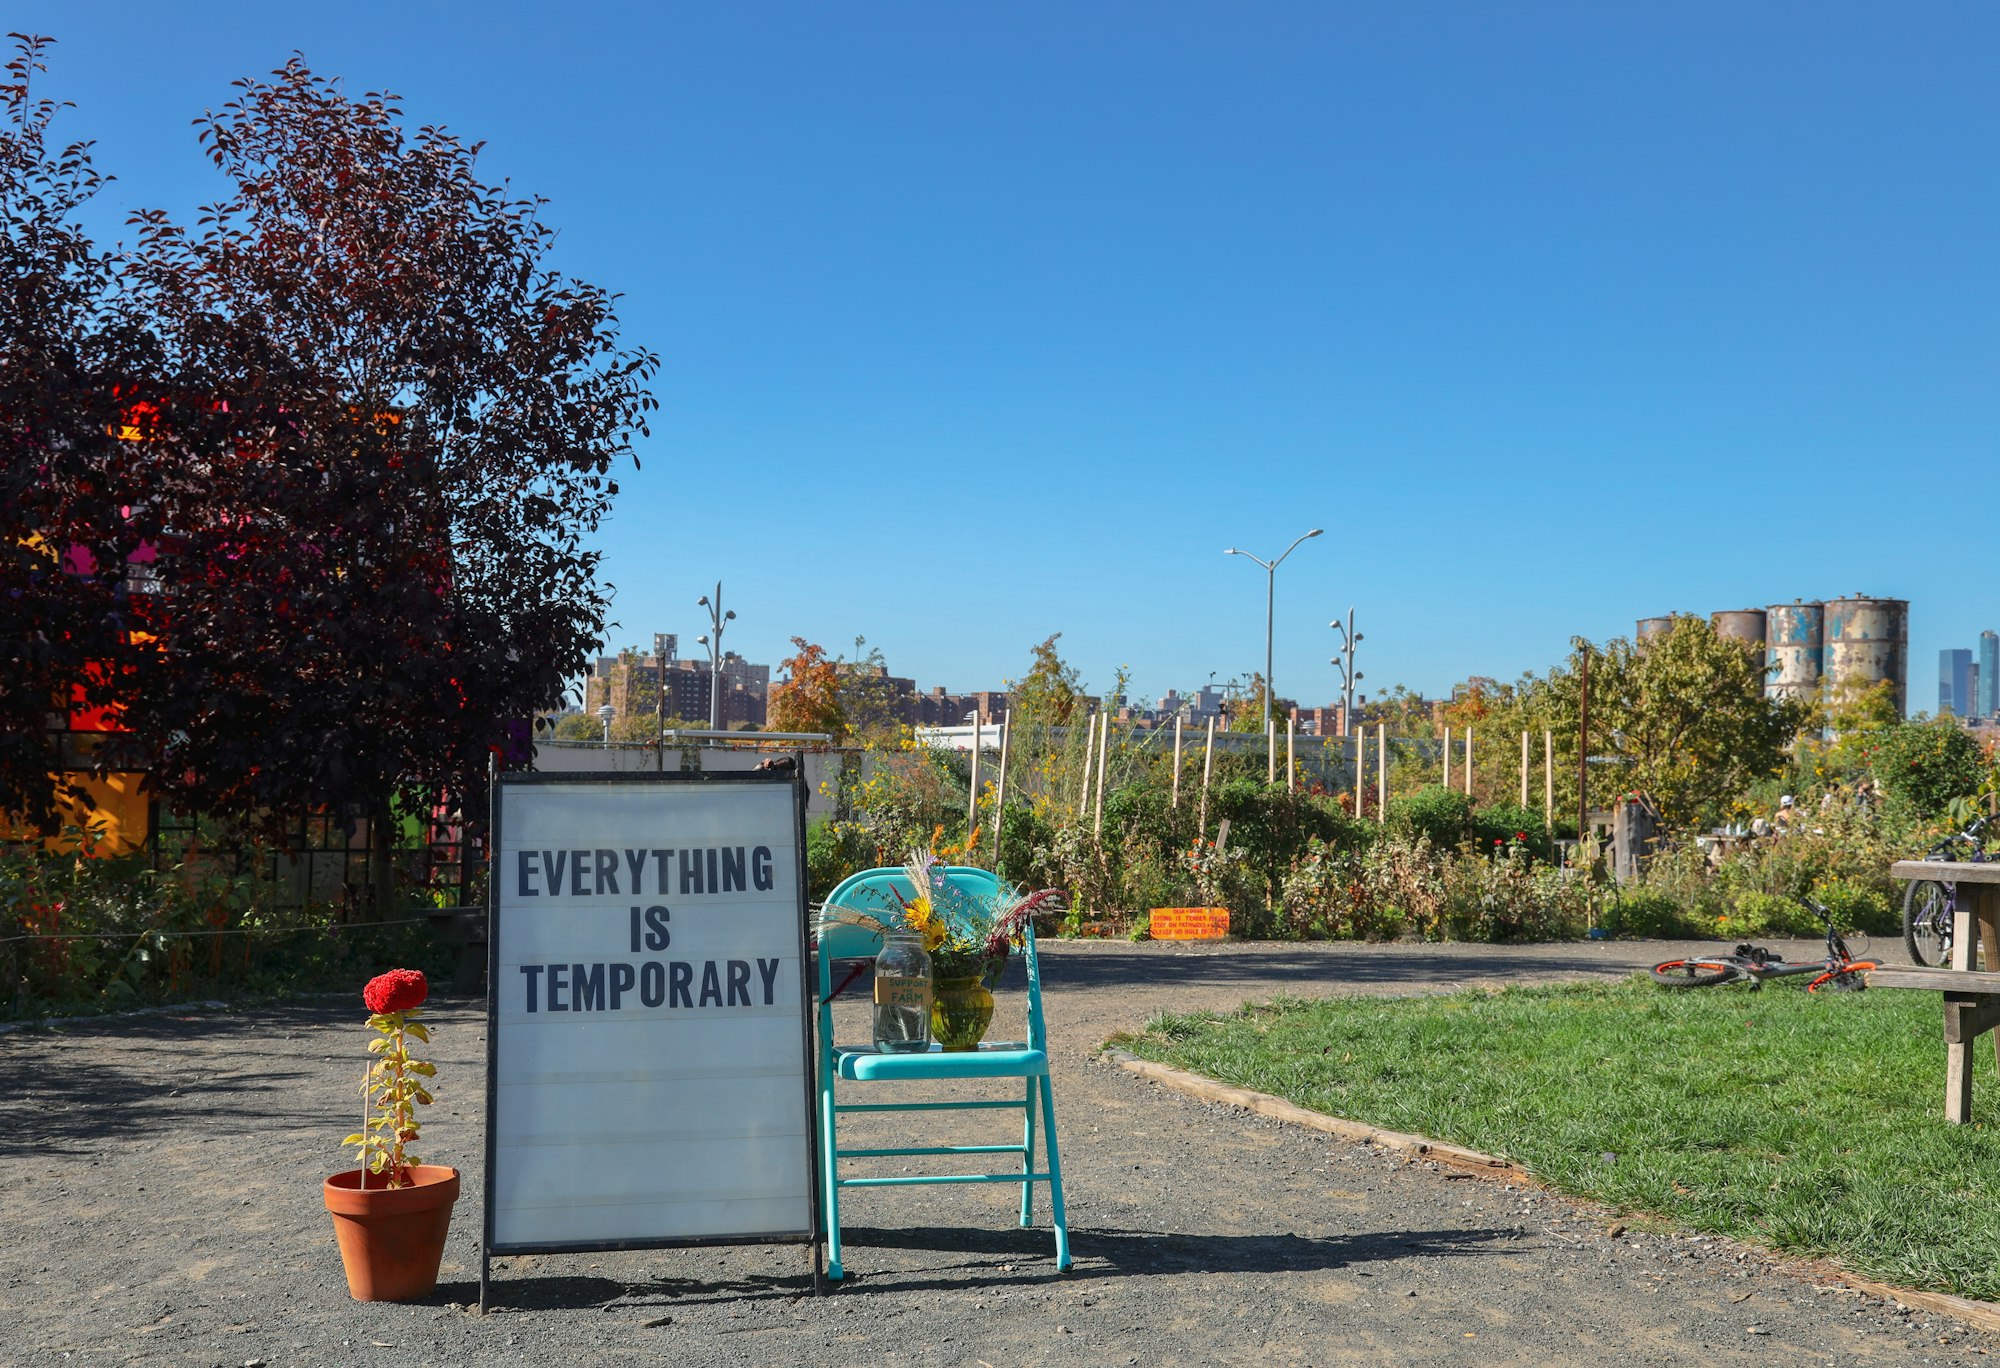 a sign reading "everything is temporary" next to a flower in a pot and a plant on a chair, on a gravel track in a park, with 